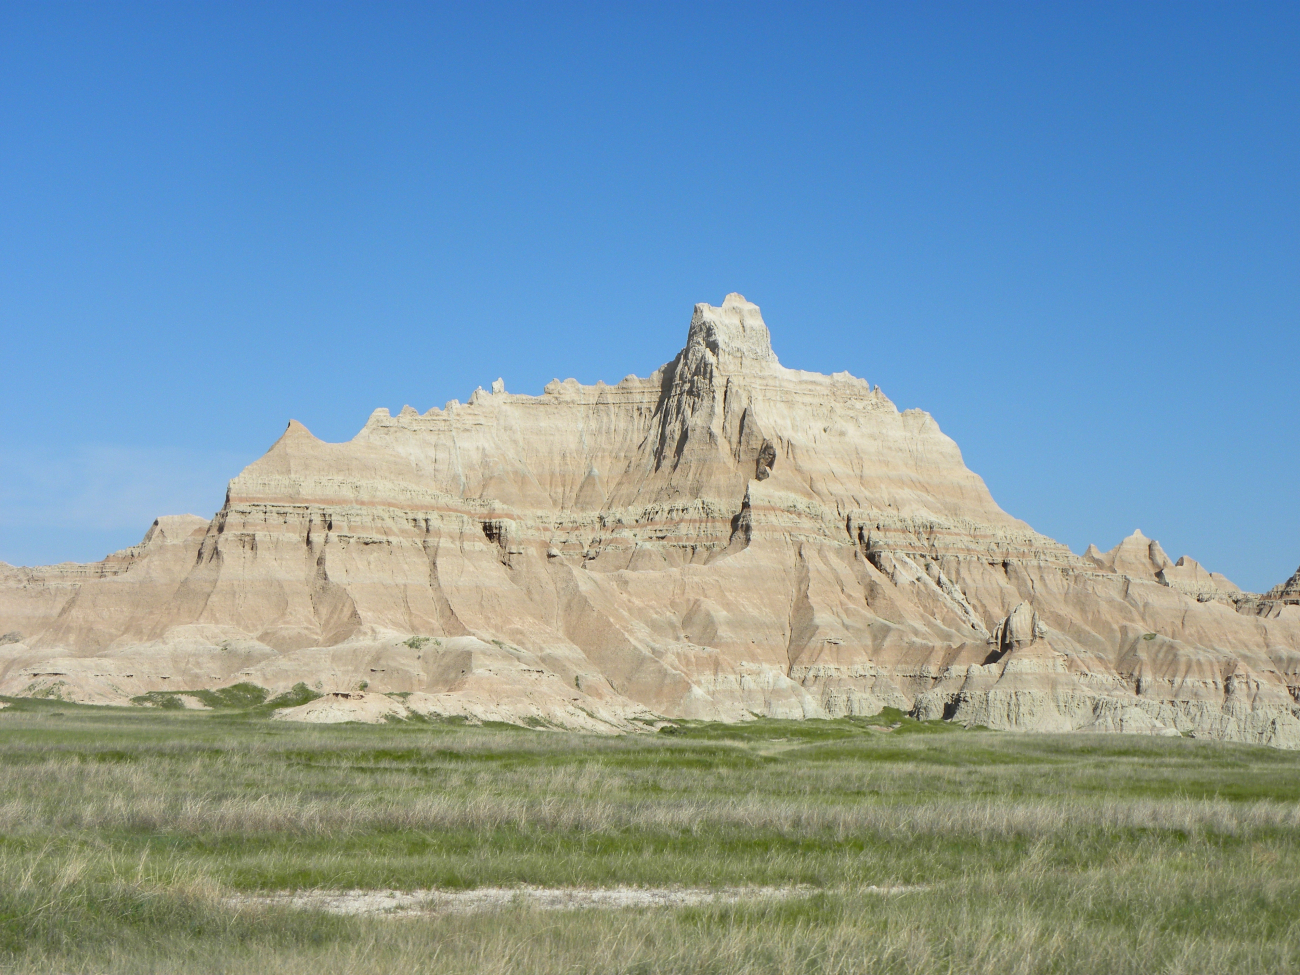 A scene in the Badlands near the aptly named Interior in the SW area of SouthDakota